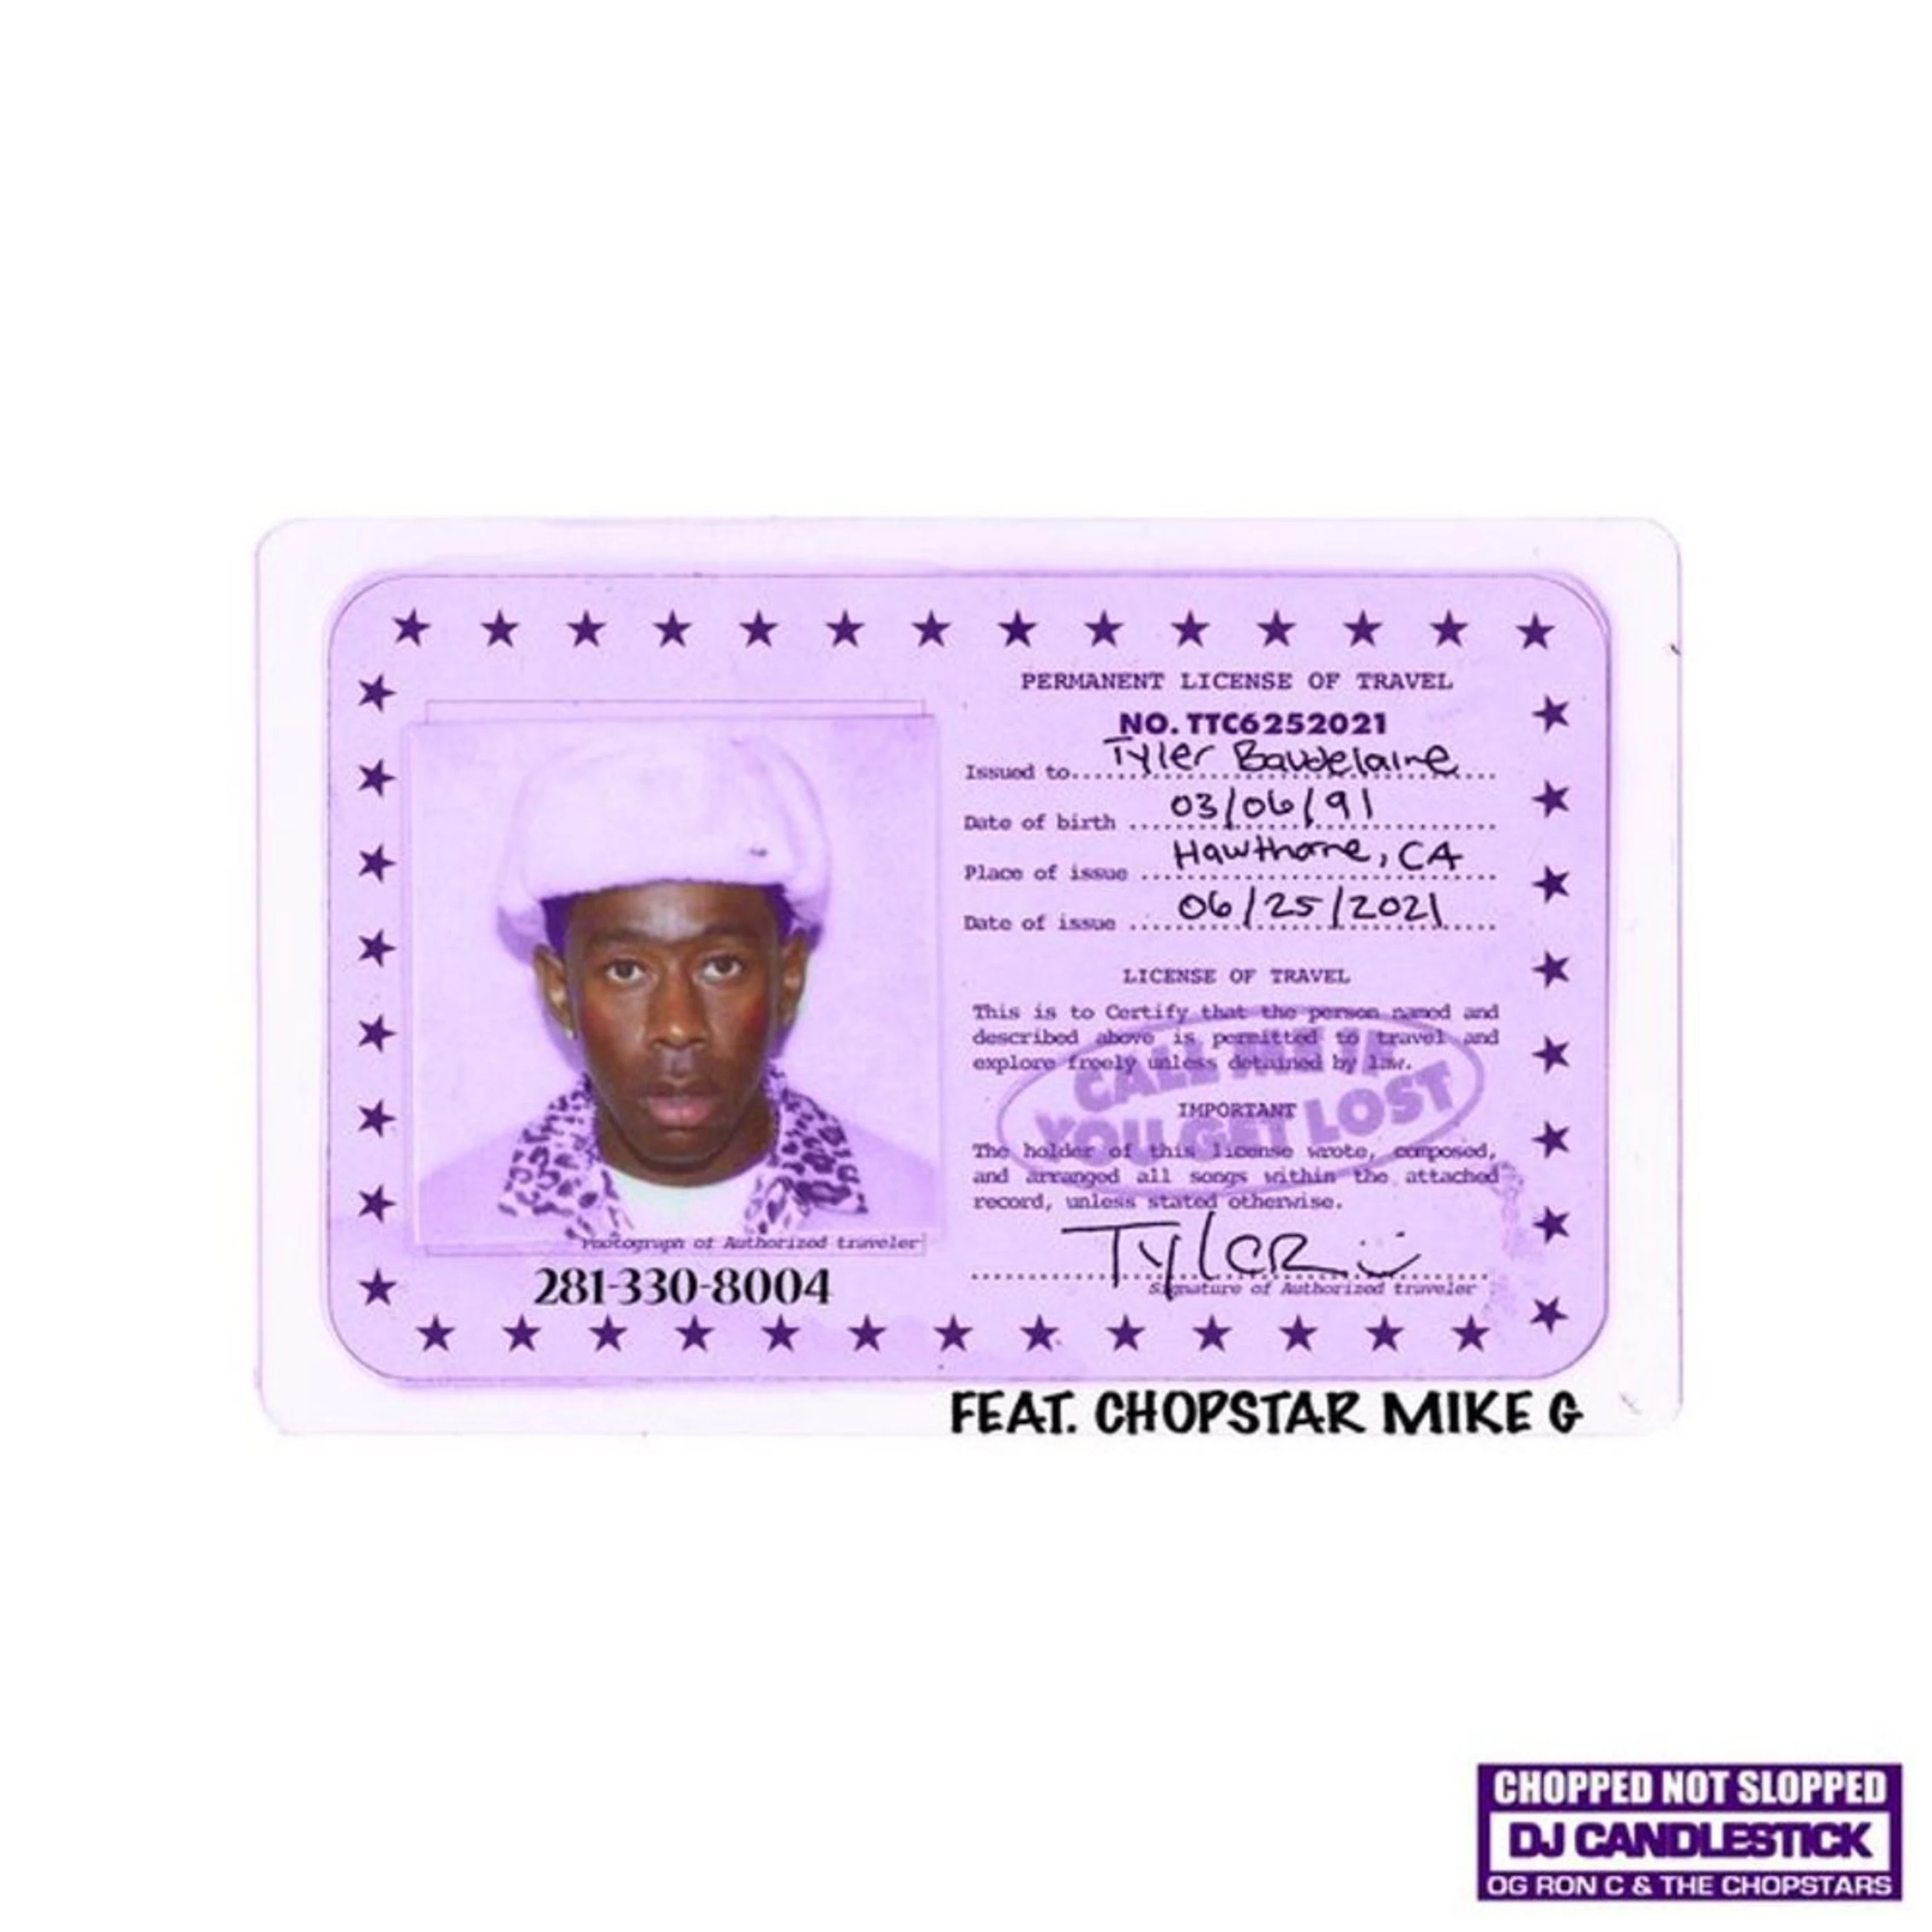 Tyler, The Creator’s “CALL ME IF YOU GET LOST” Gets The Chopstars Treatment